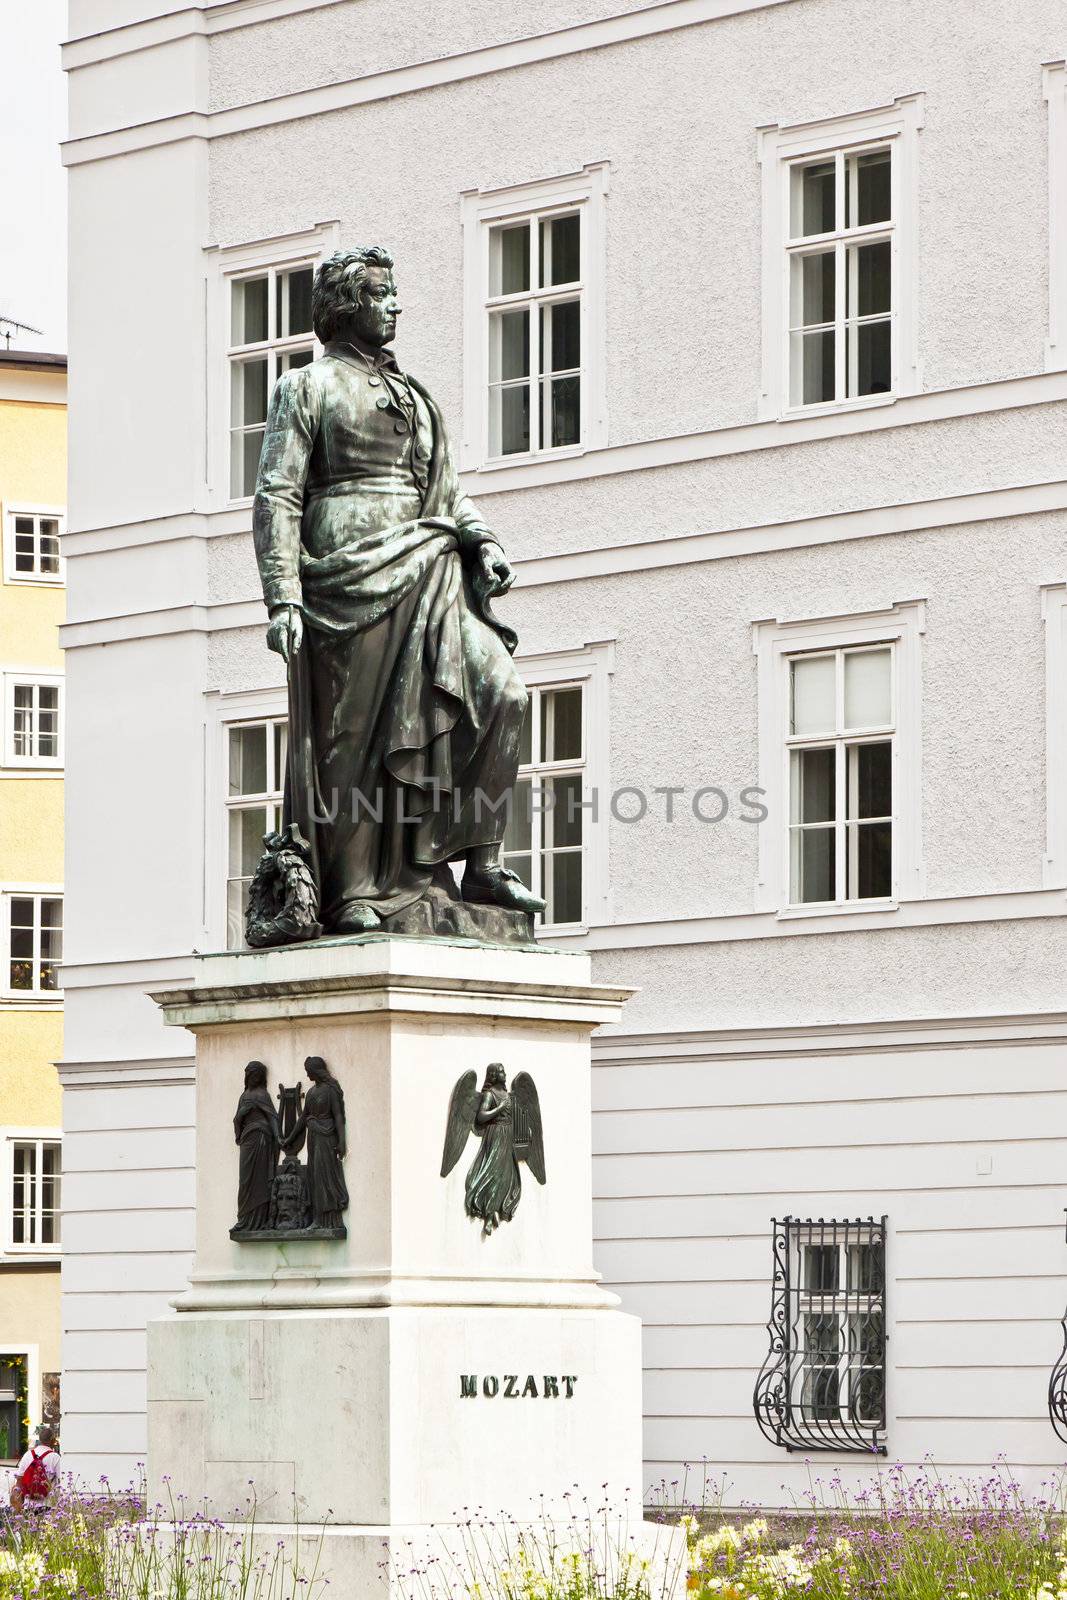 An image of the nice Mozart statue in Salzburg